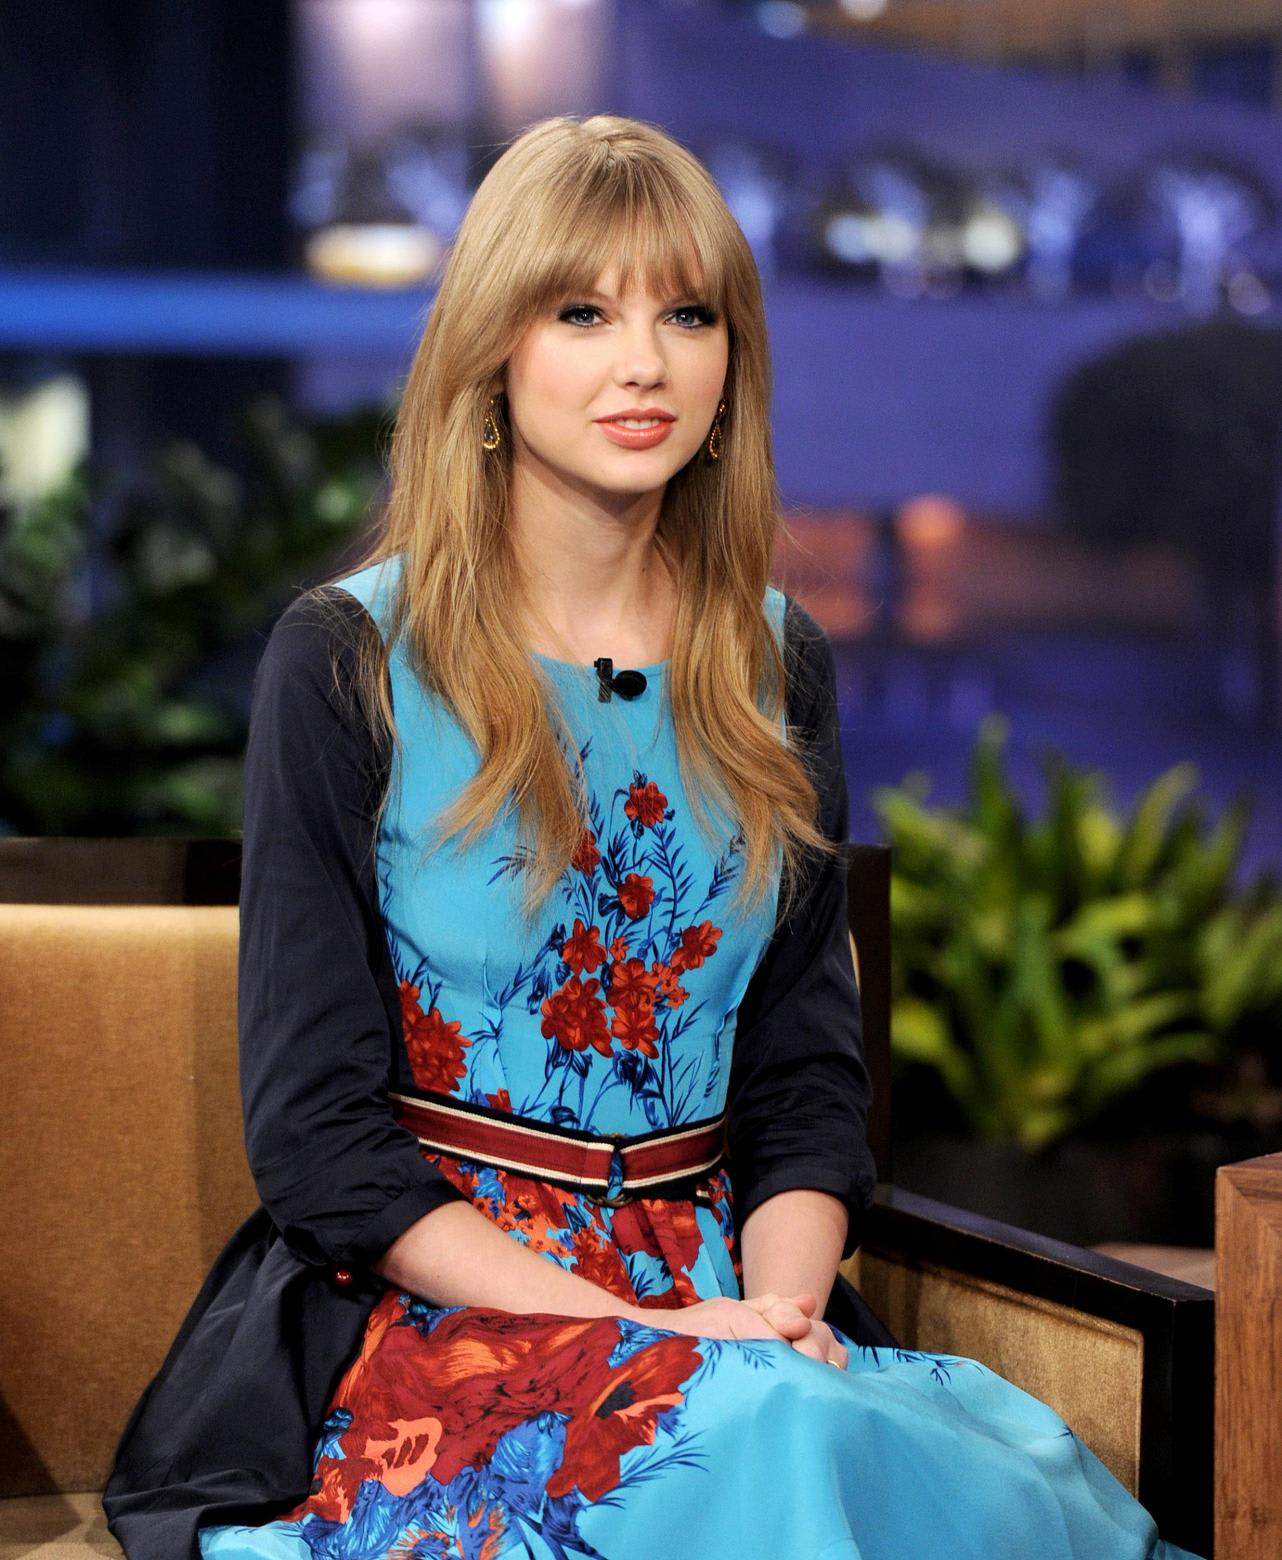 Taylor Swift visits The Tonight Show with Jay Leno 20 Feb 2012 - ☆Favorite Celebrity ...